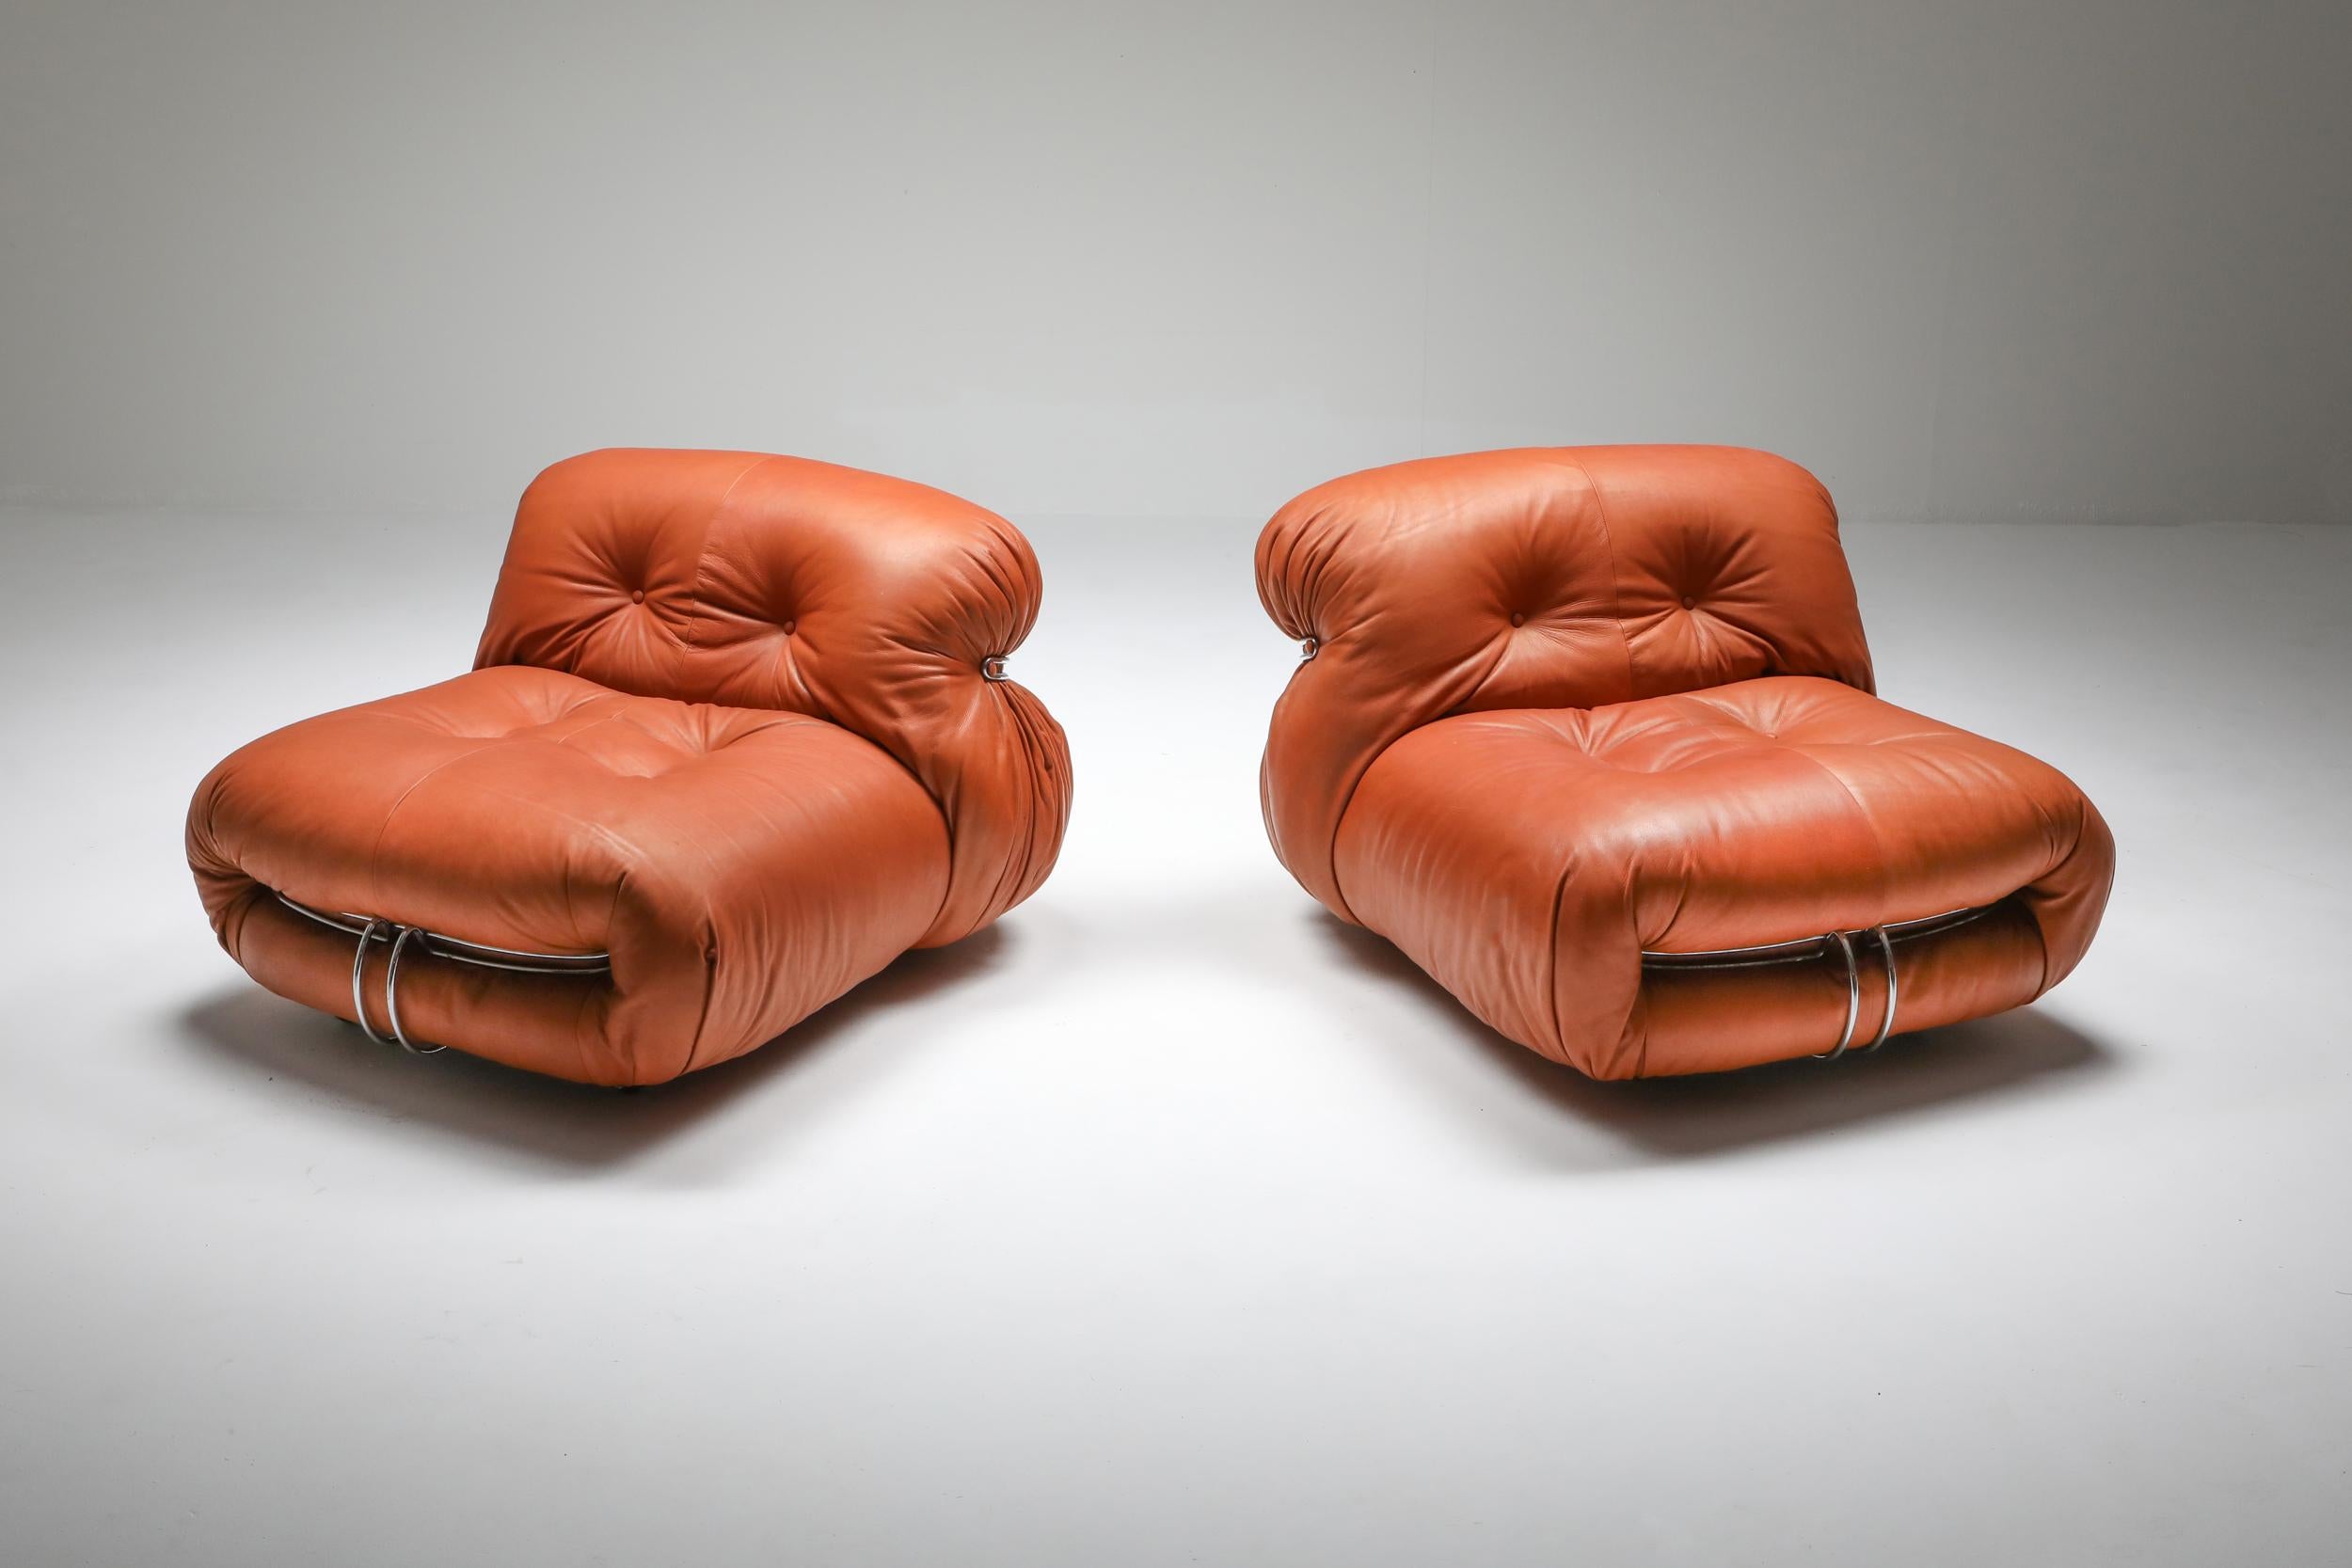 Post-Modern Afra and Tobia Scarpa for Cassina 'Soriana' Pair of Lounge Chairs, 1970's For Sale